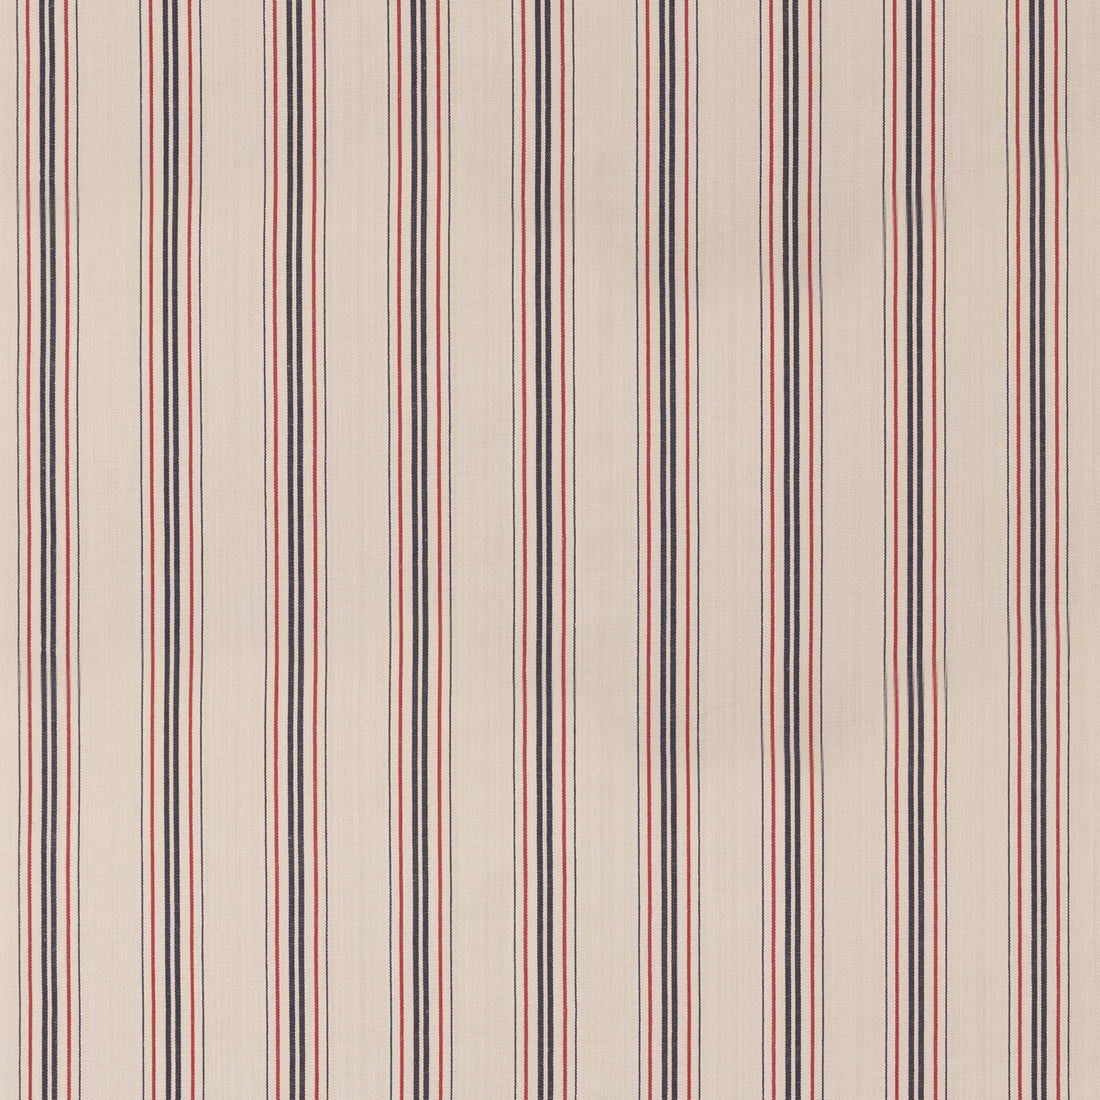 Seaford Stripe fabric in blue/red color - pattern FD834.G103.0 - by Mulberry in the Westerly Stripes collection